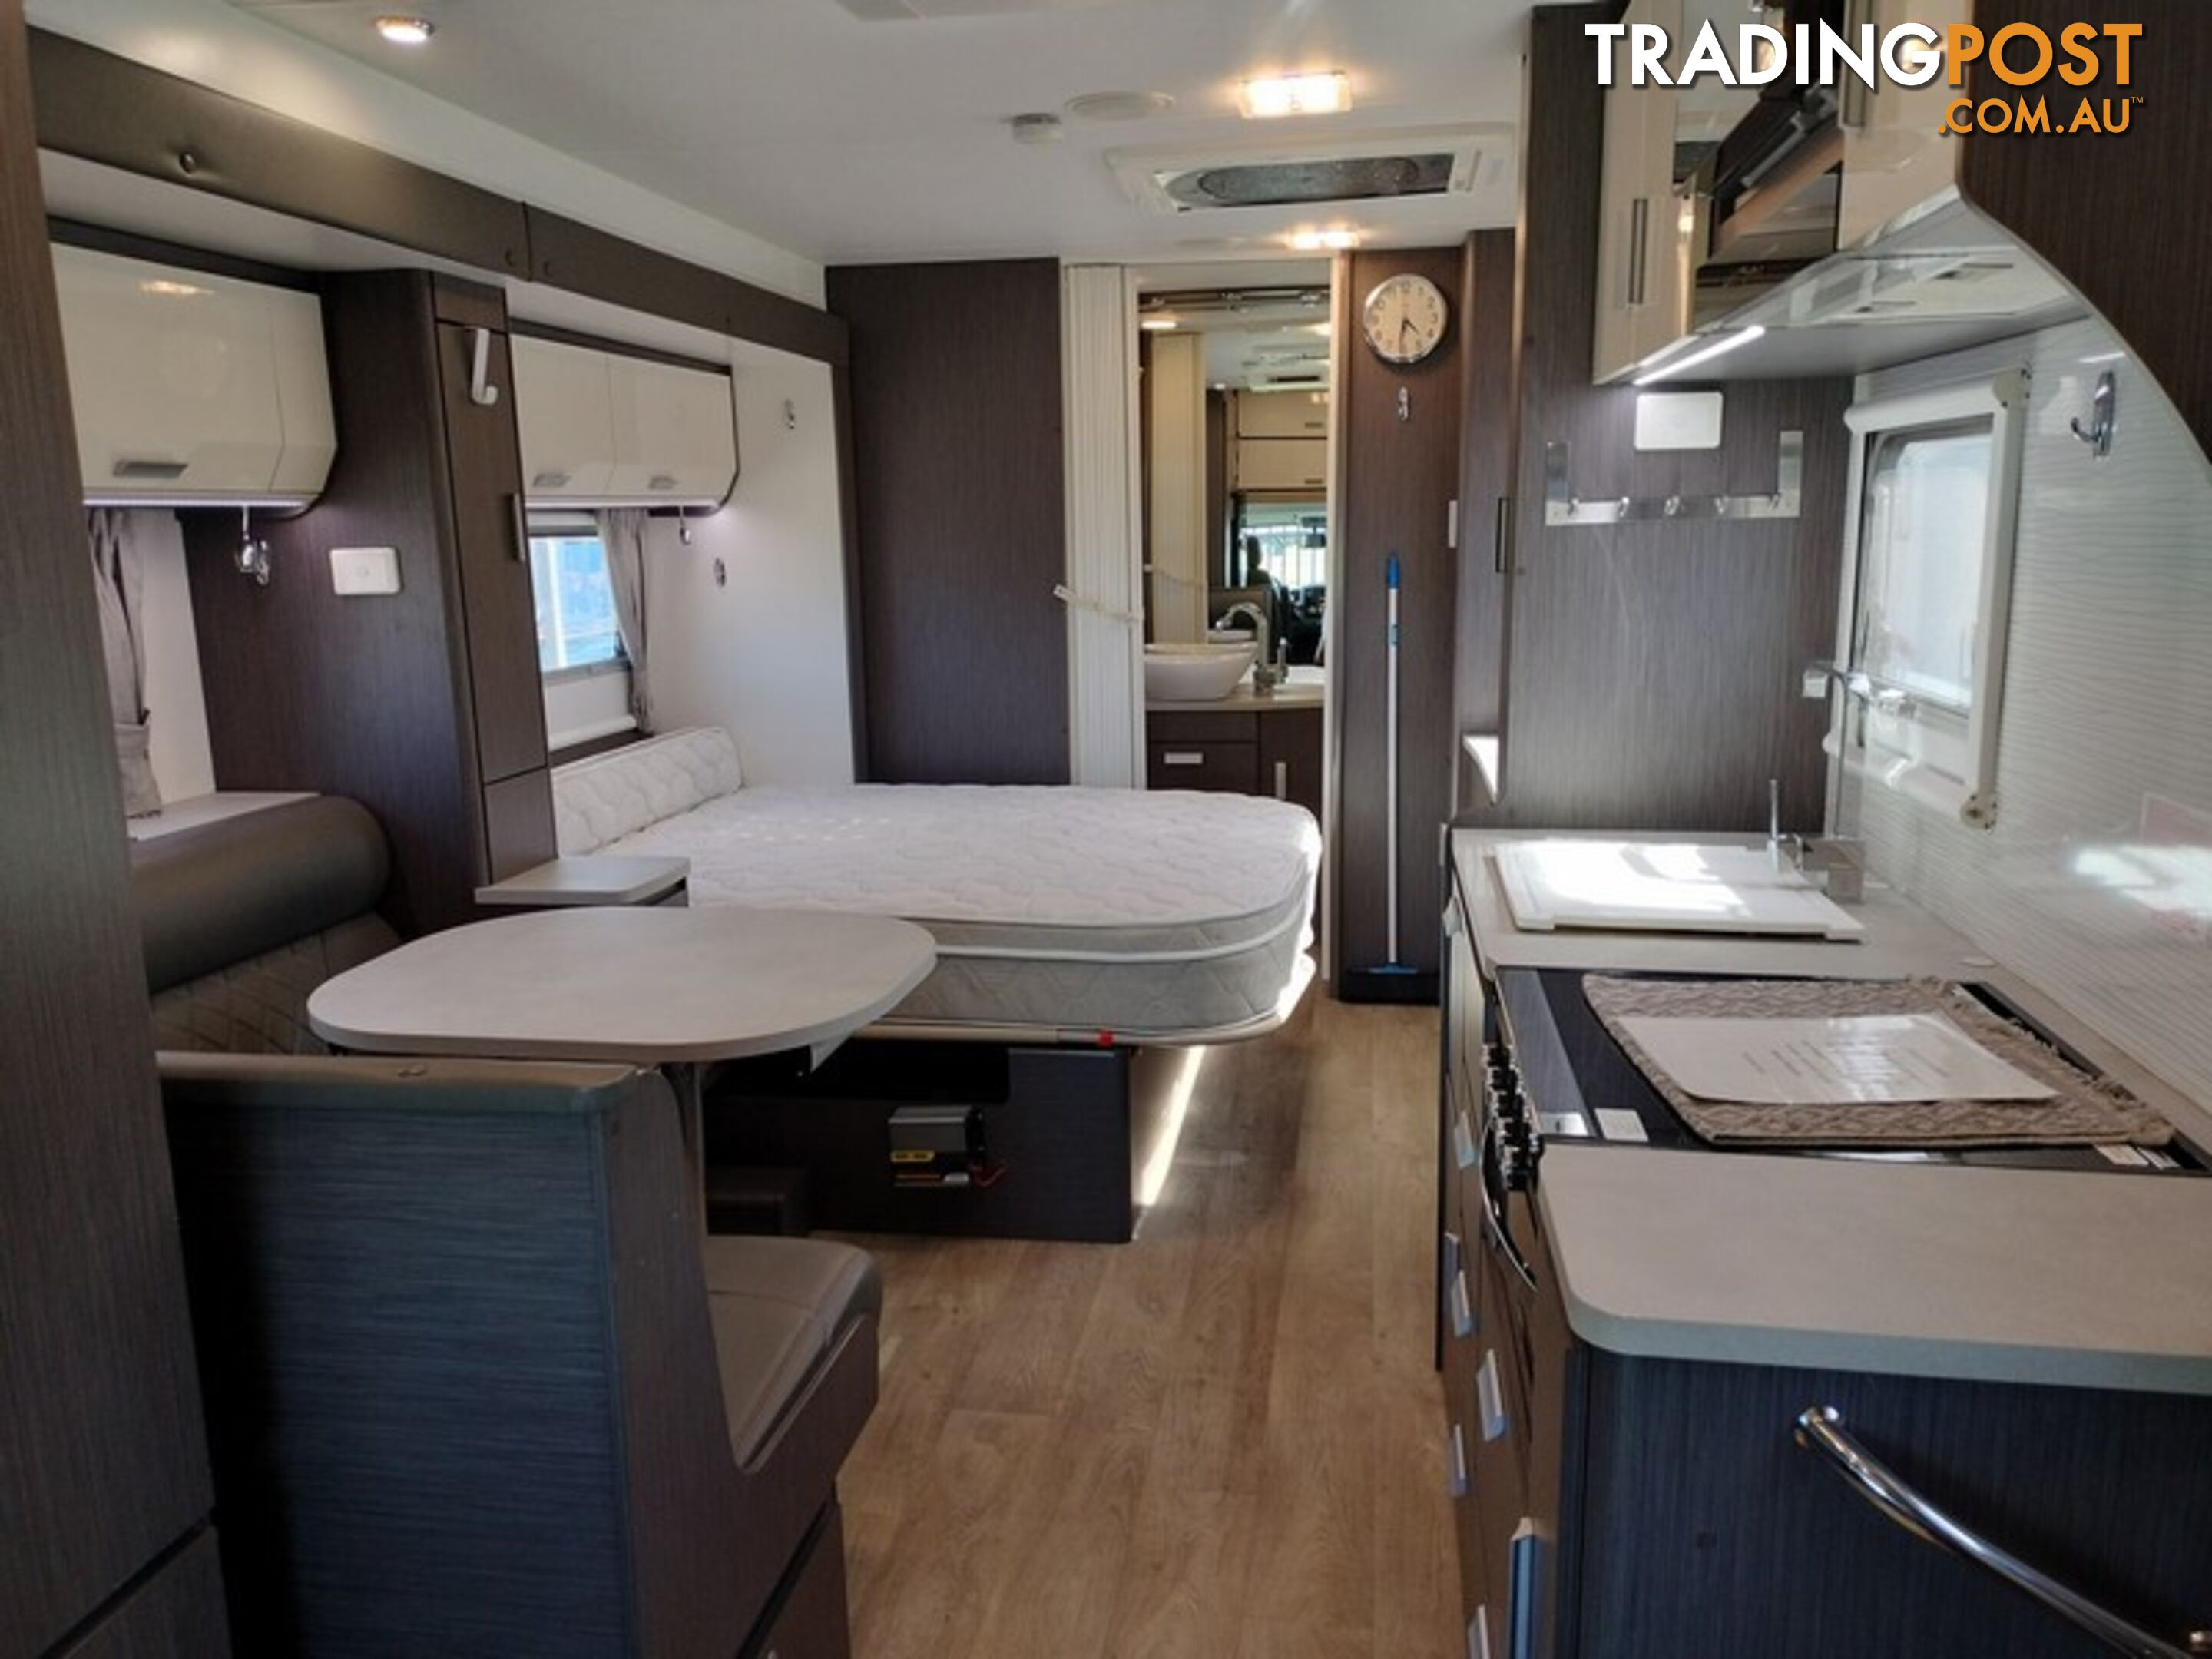 2019 Jayco Conquest DX 25-3 Motorhome